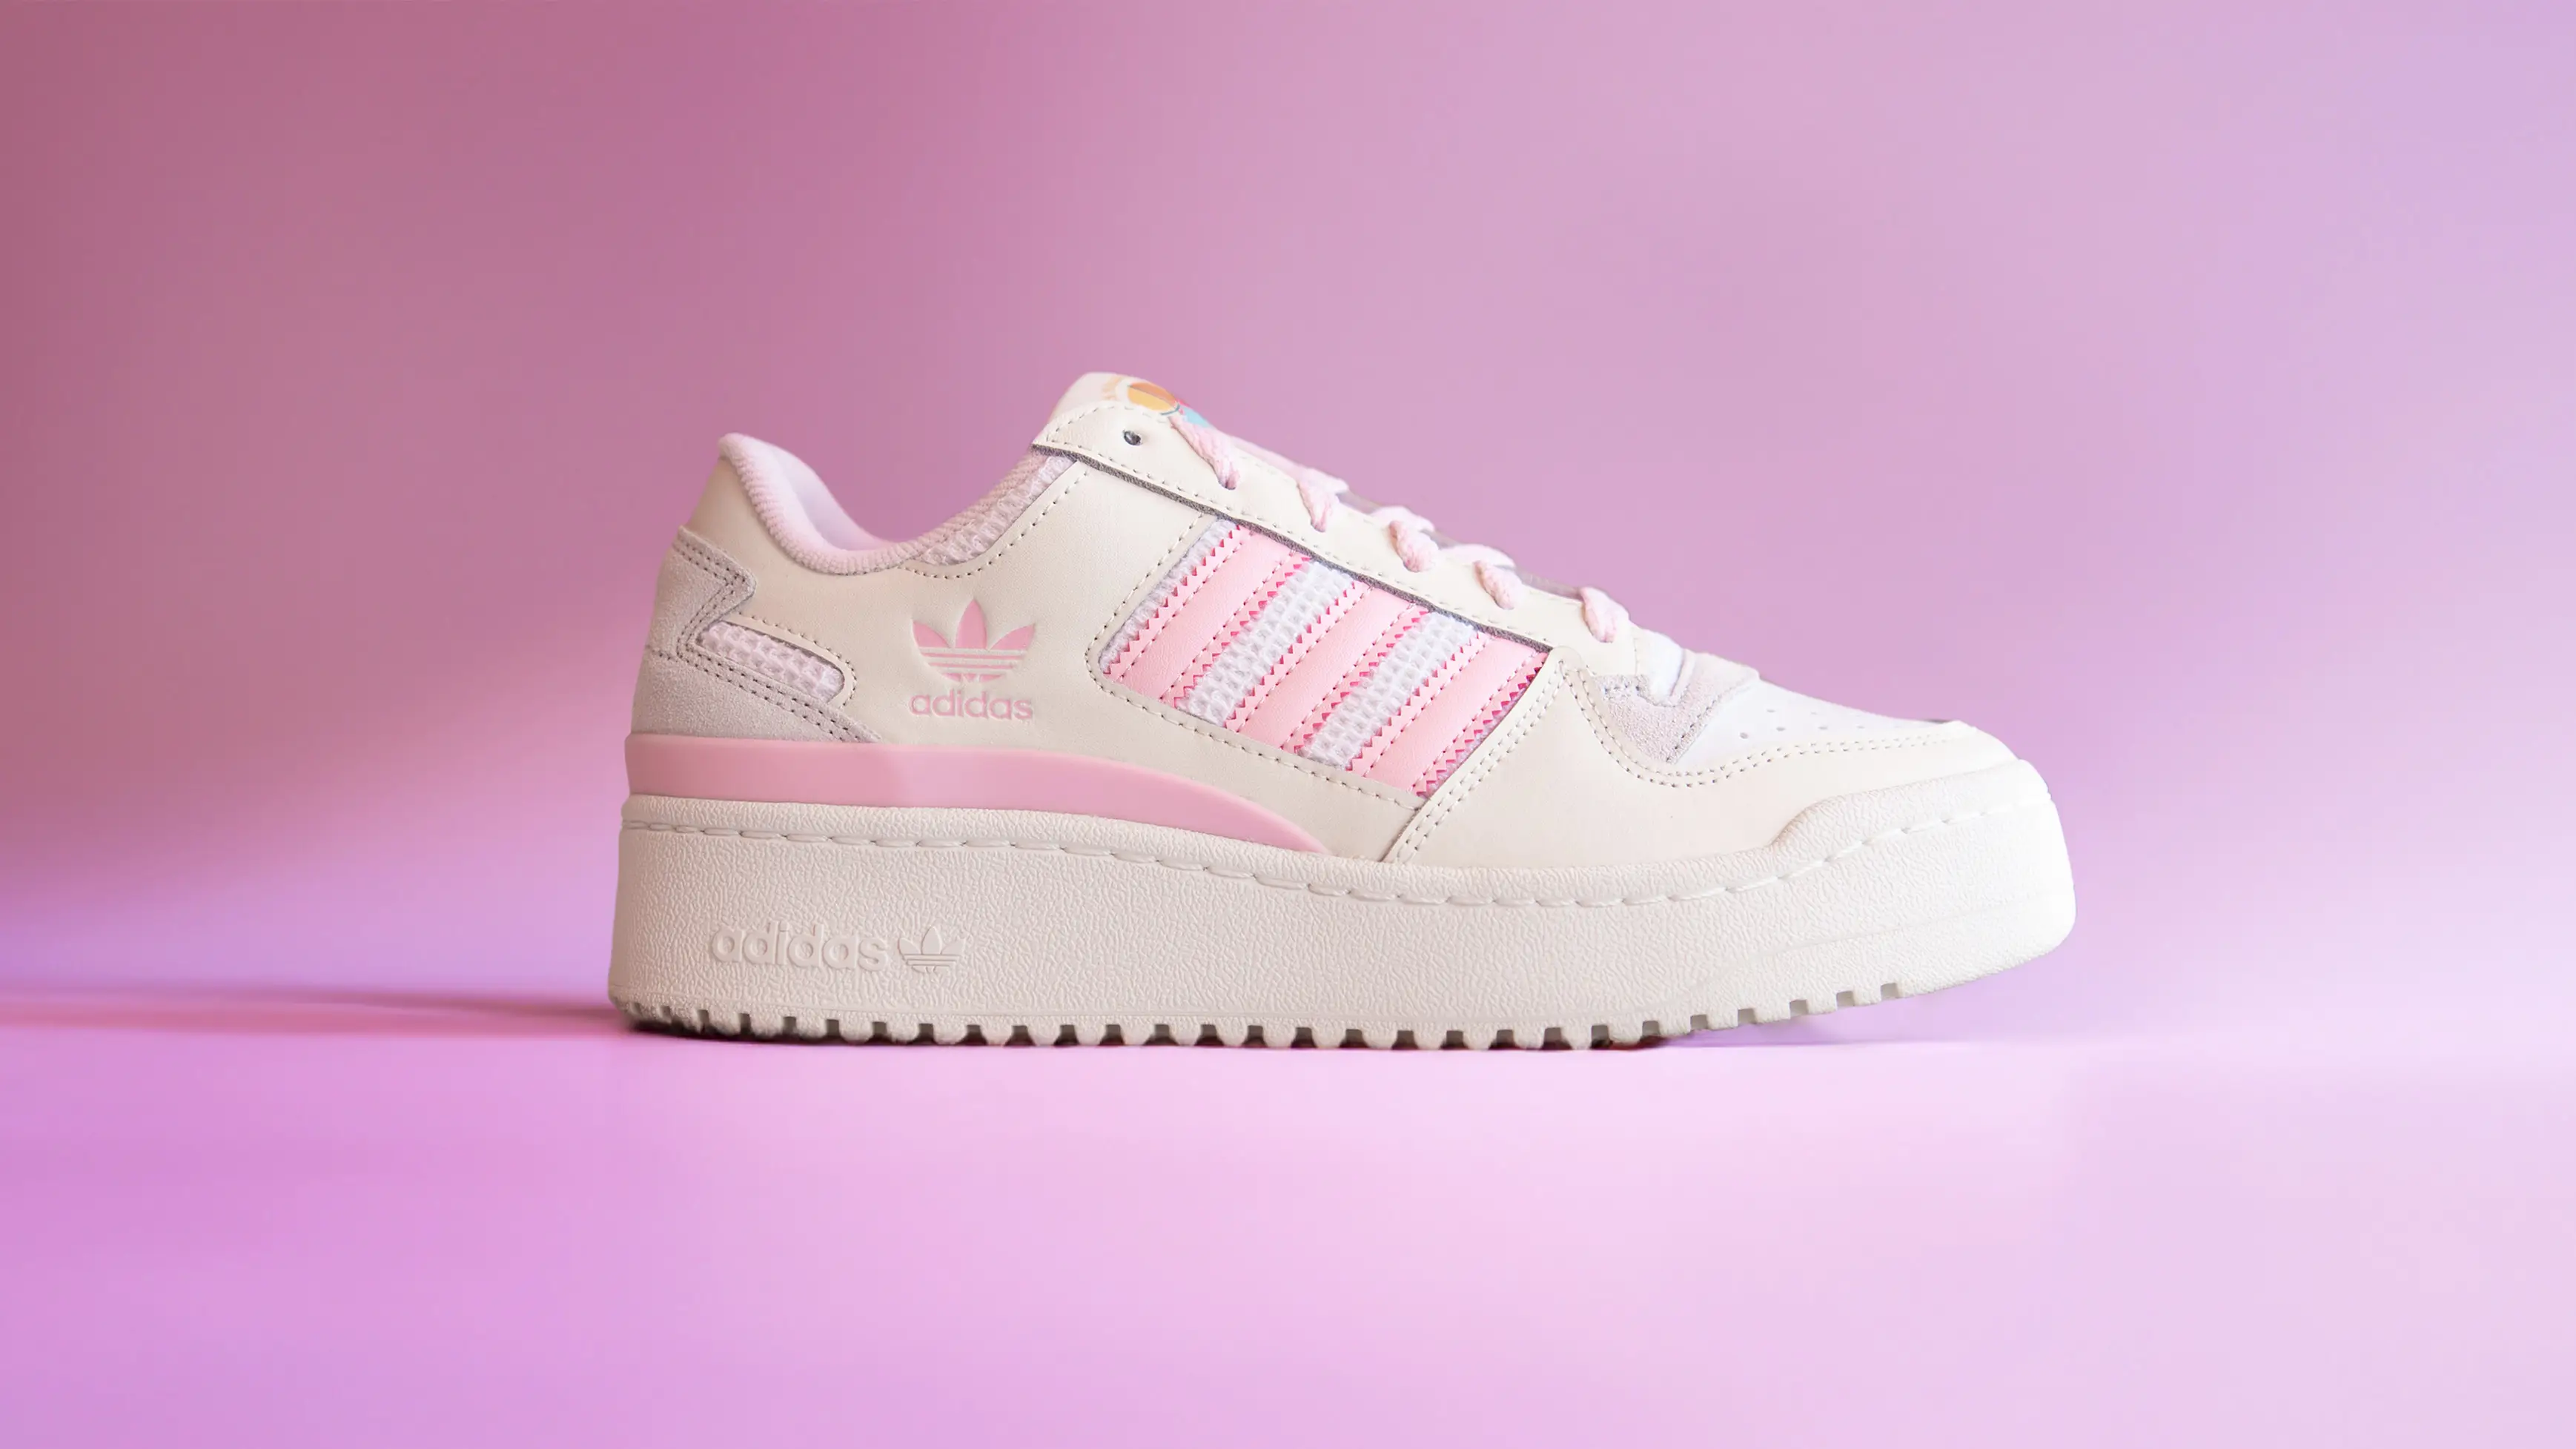 adidas gazelle cutout w lady on facebook cover Continues With This Cream & Pink adidas Forum Bold